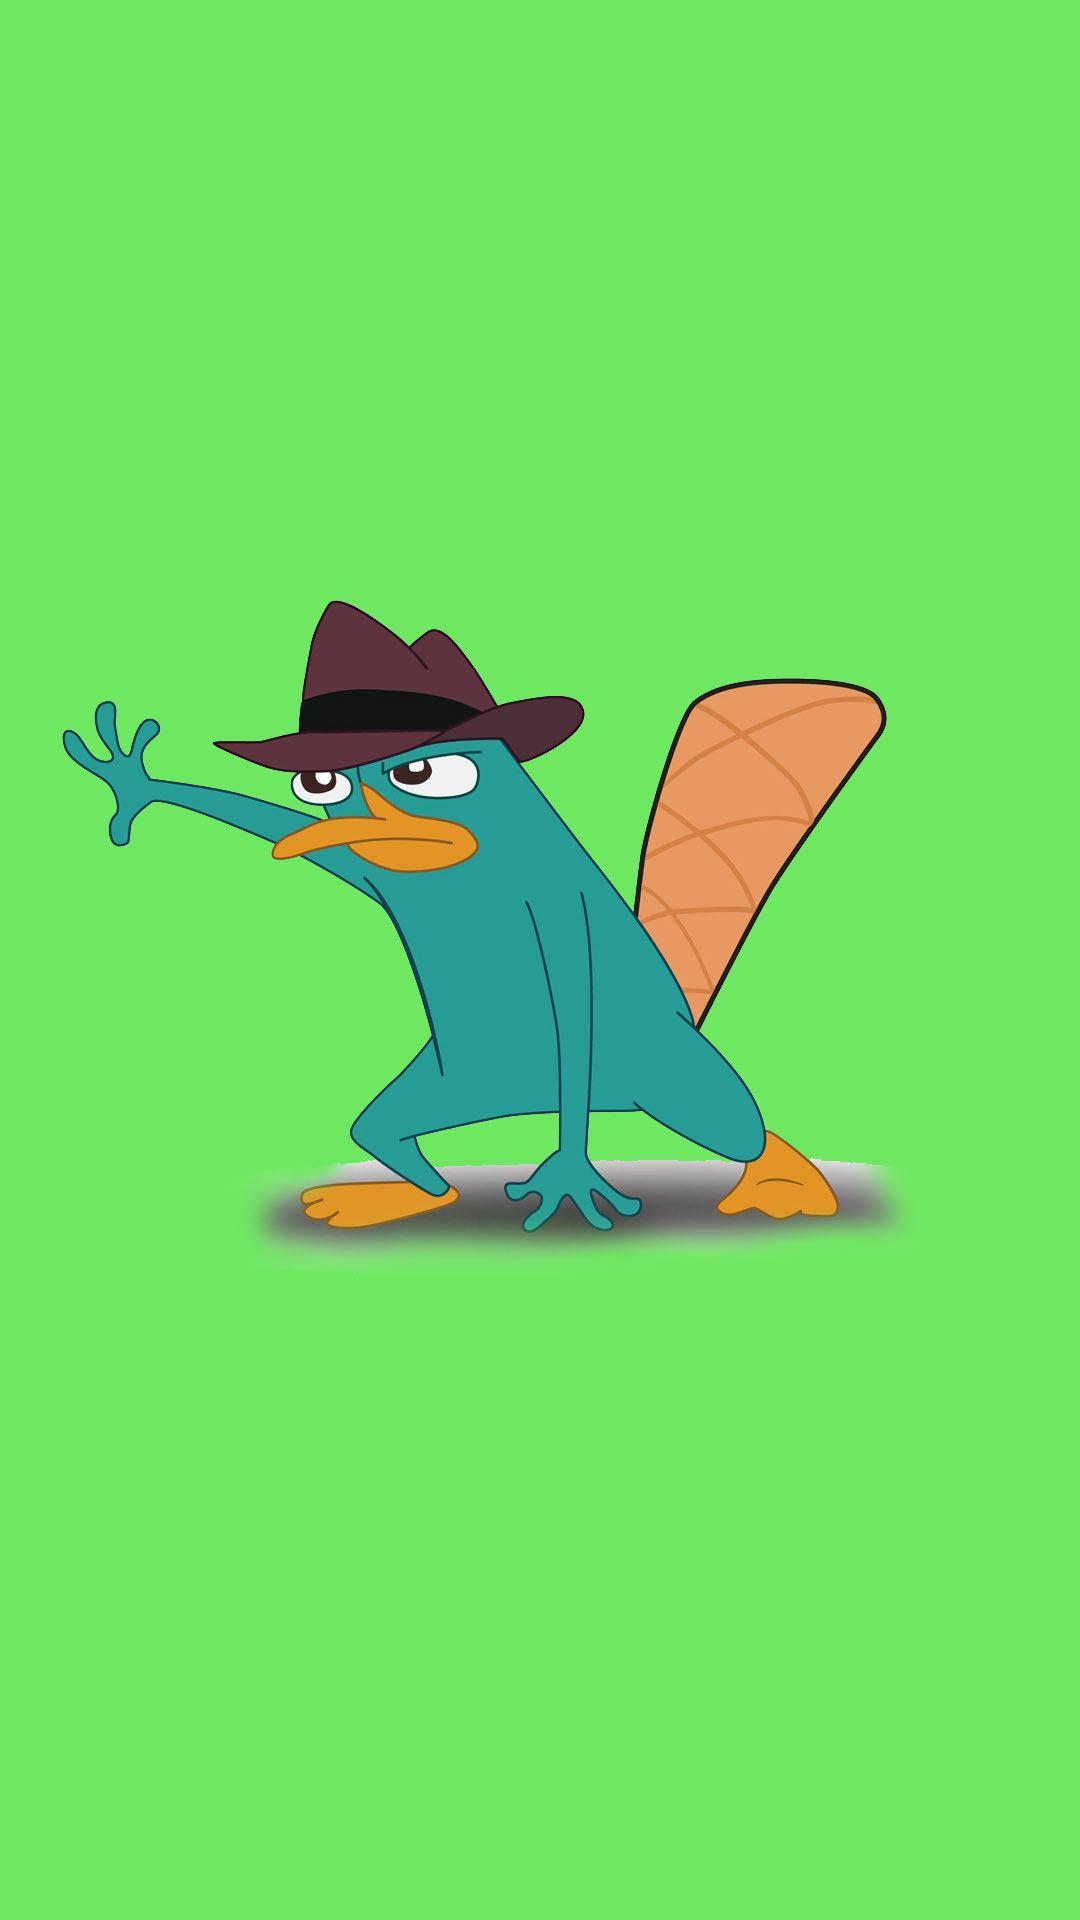 wallpaper perry the platypus by SadowWolfKACT on DeviantArt